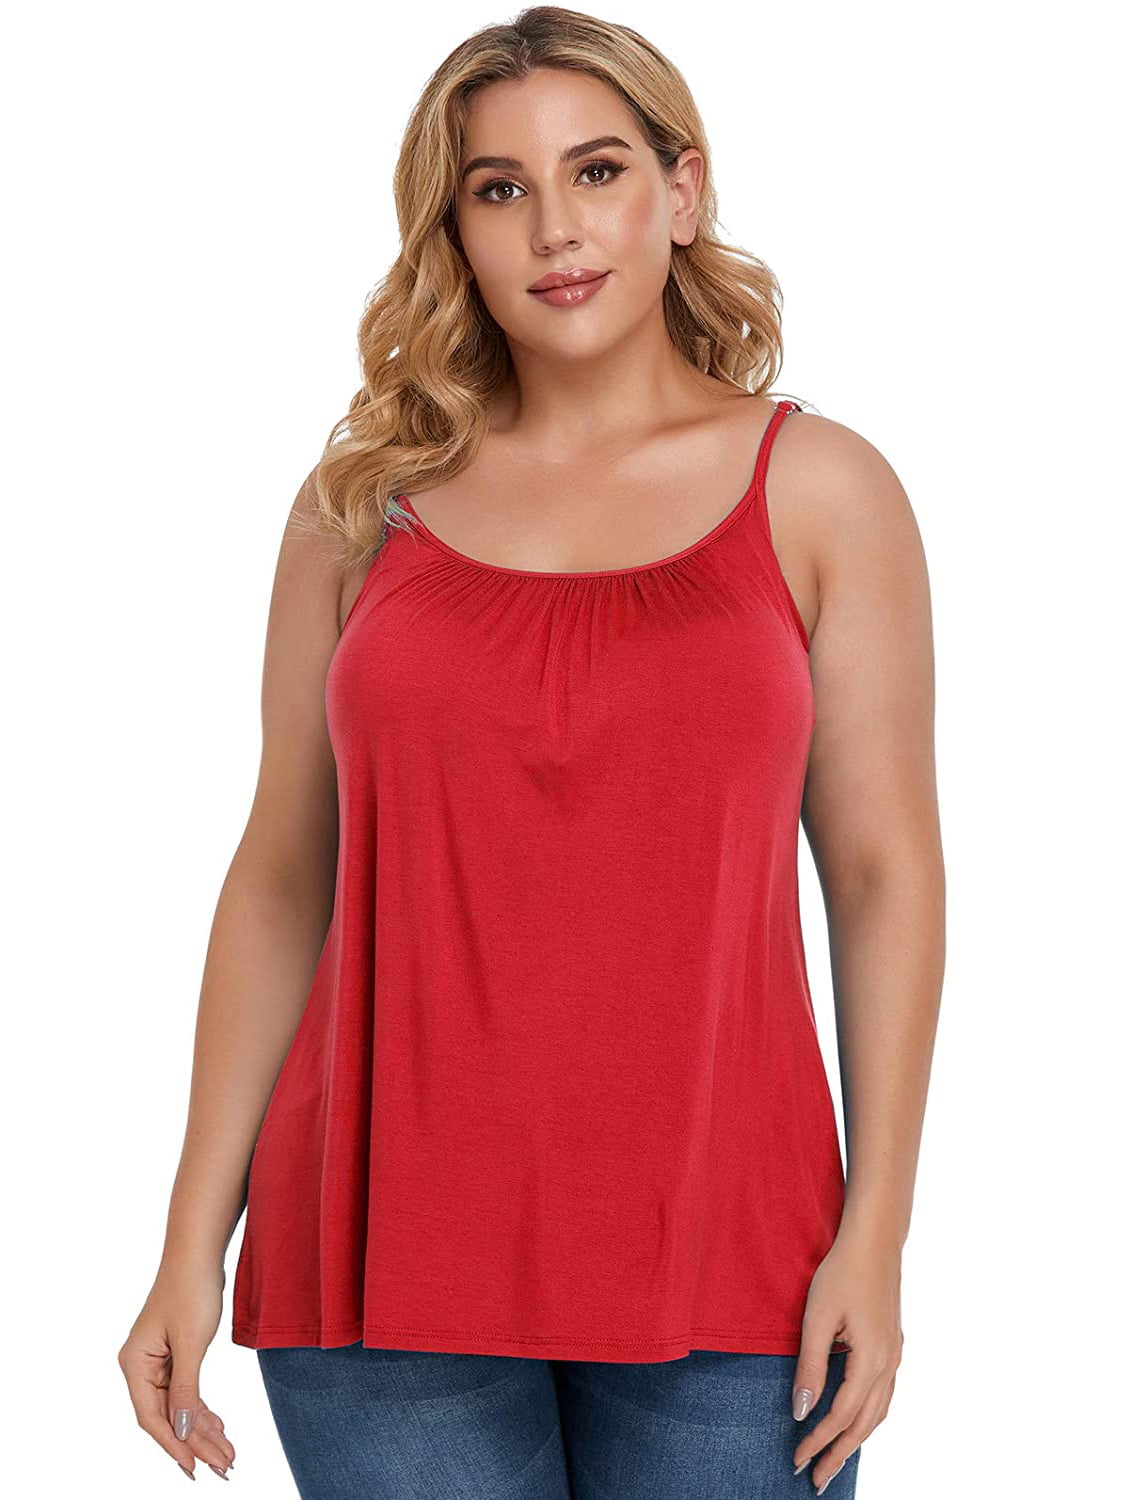 Camisoles for Women with Built in Bra Adjustable Strap Tank Tops Cami  Sleeveless Summer Tops for Workout Sleeping Traveling